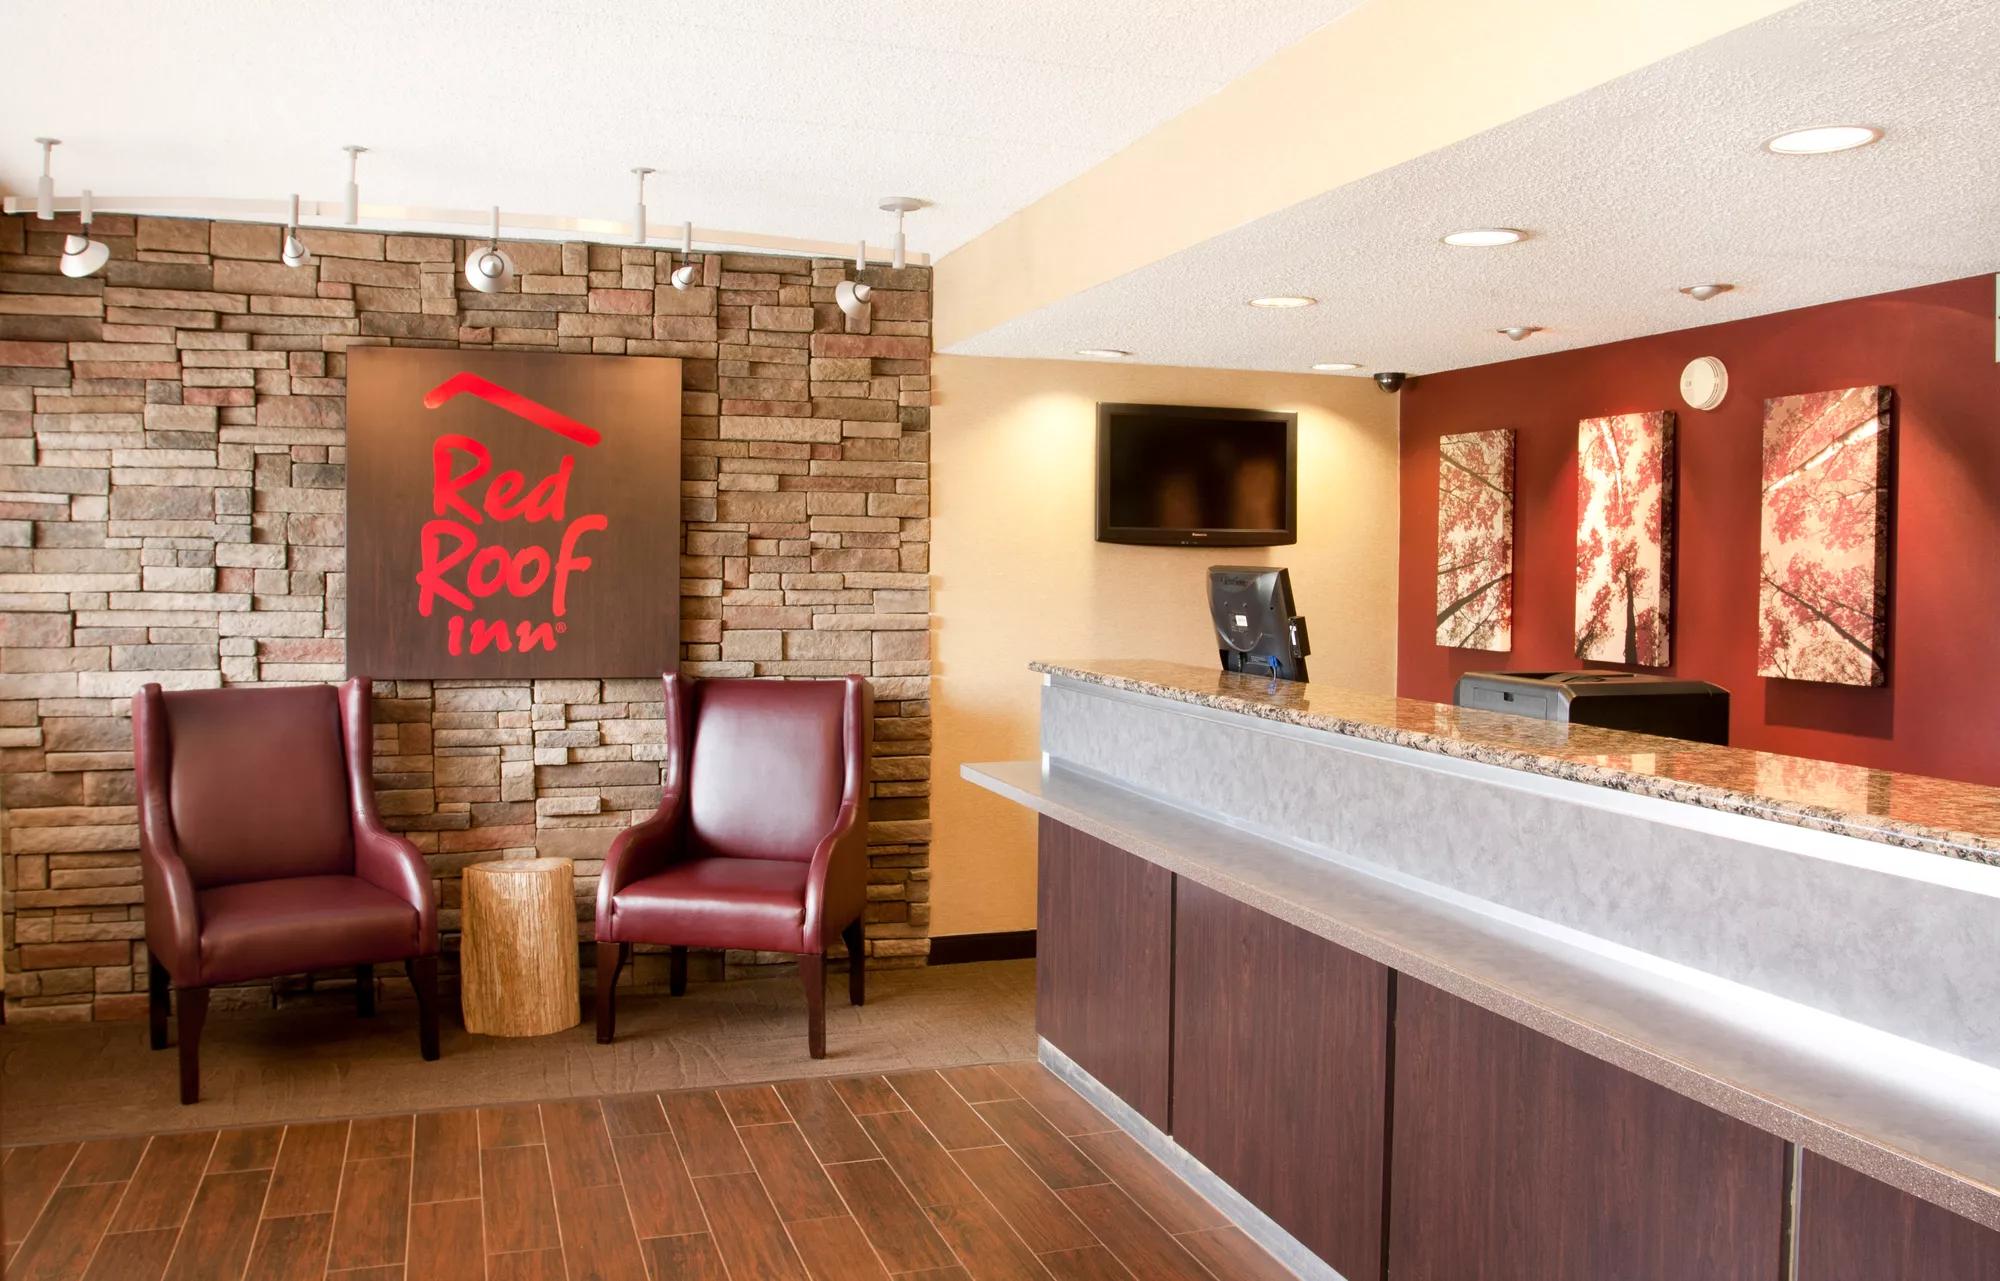 Red Roof Inn Chicago - Joliet Front Desk and Lobby Image